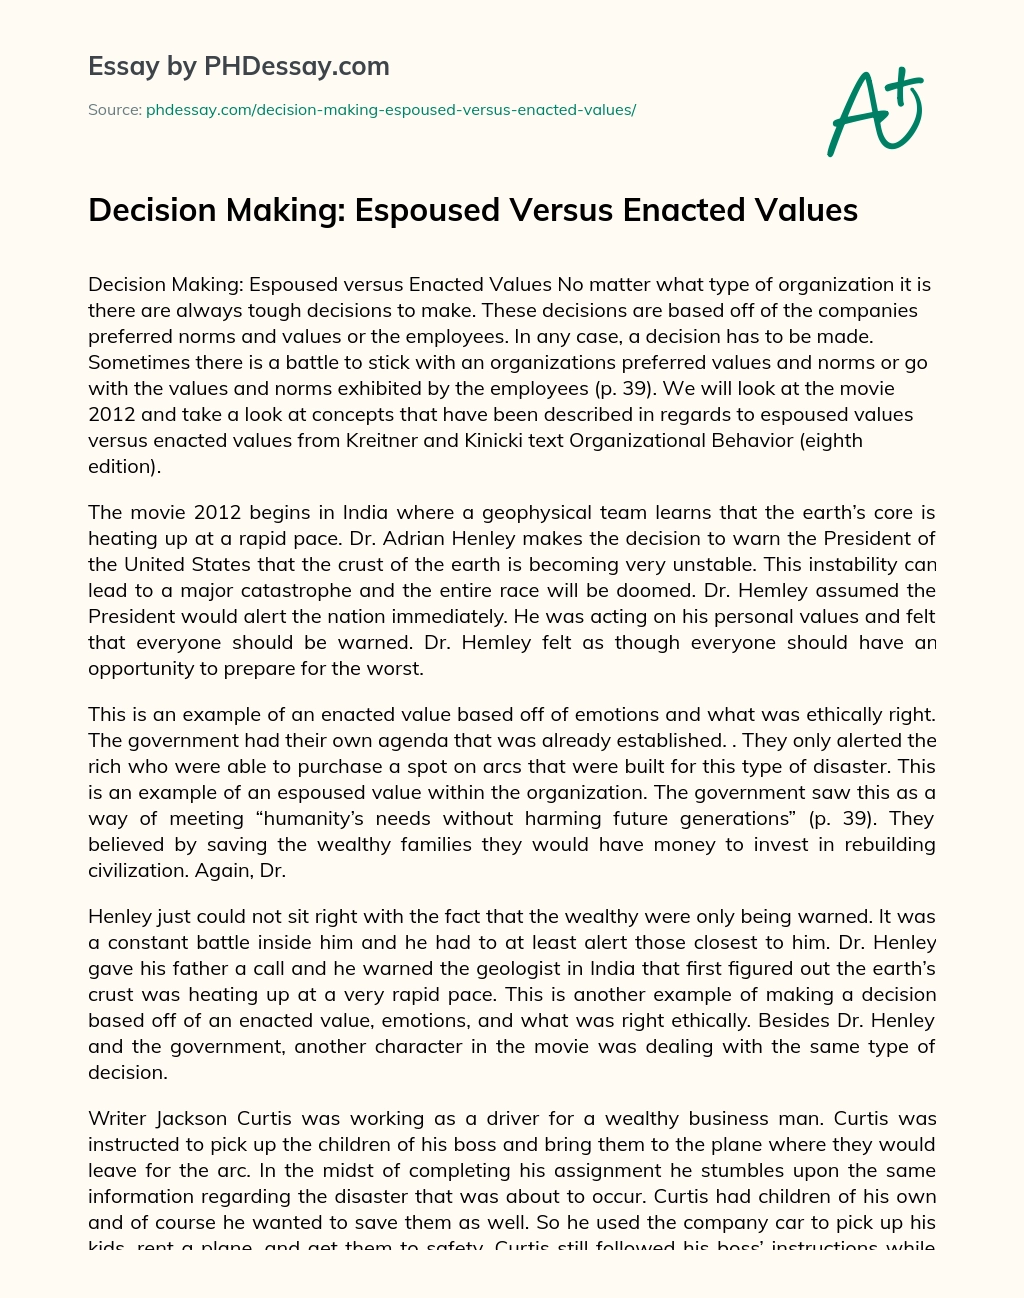 espoused values and enacted values